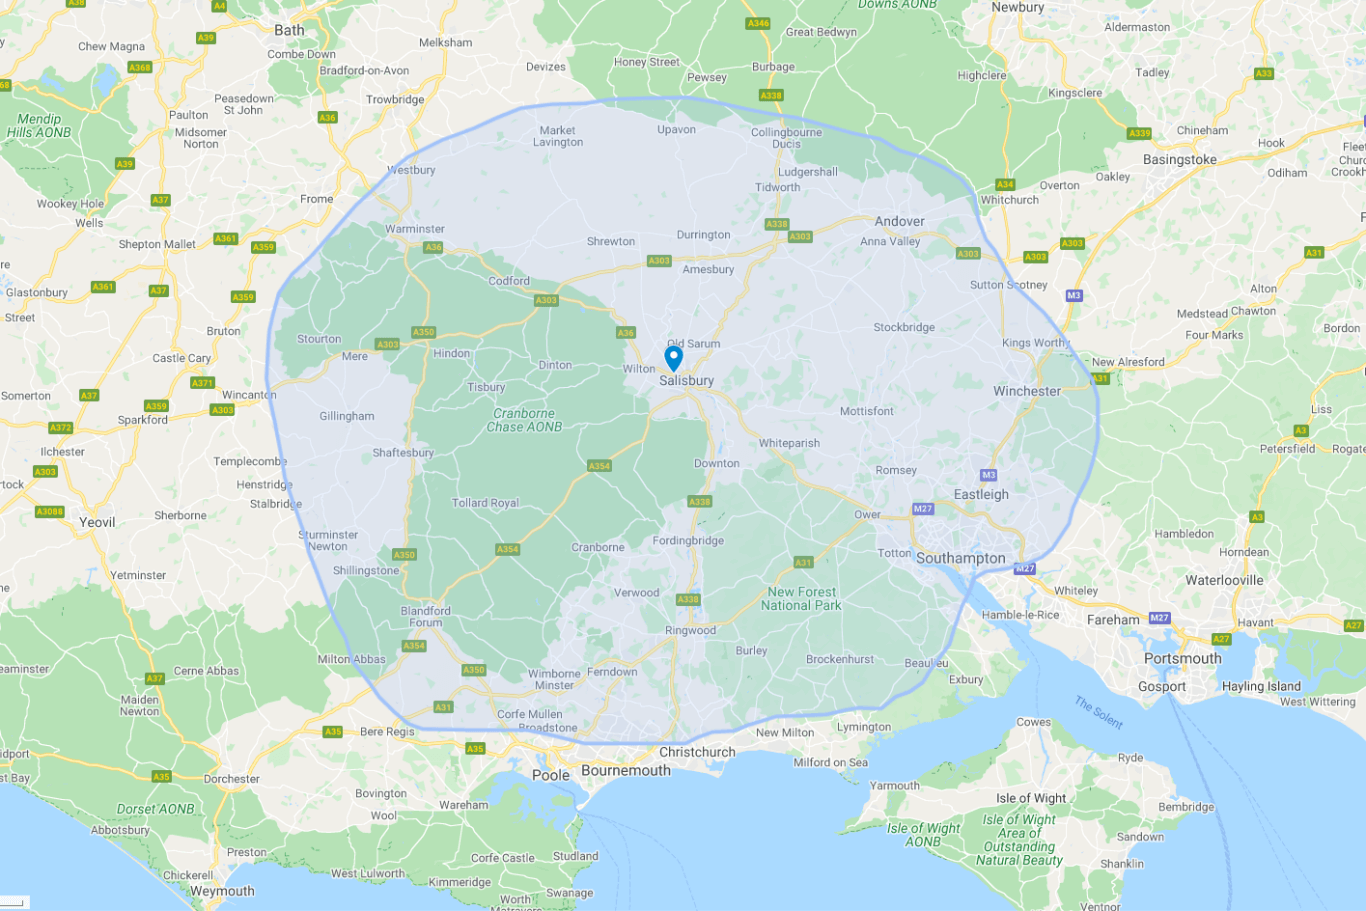 Google map with a circled area around wiltshire and hampshire.